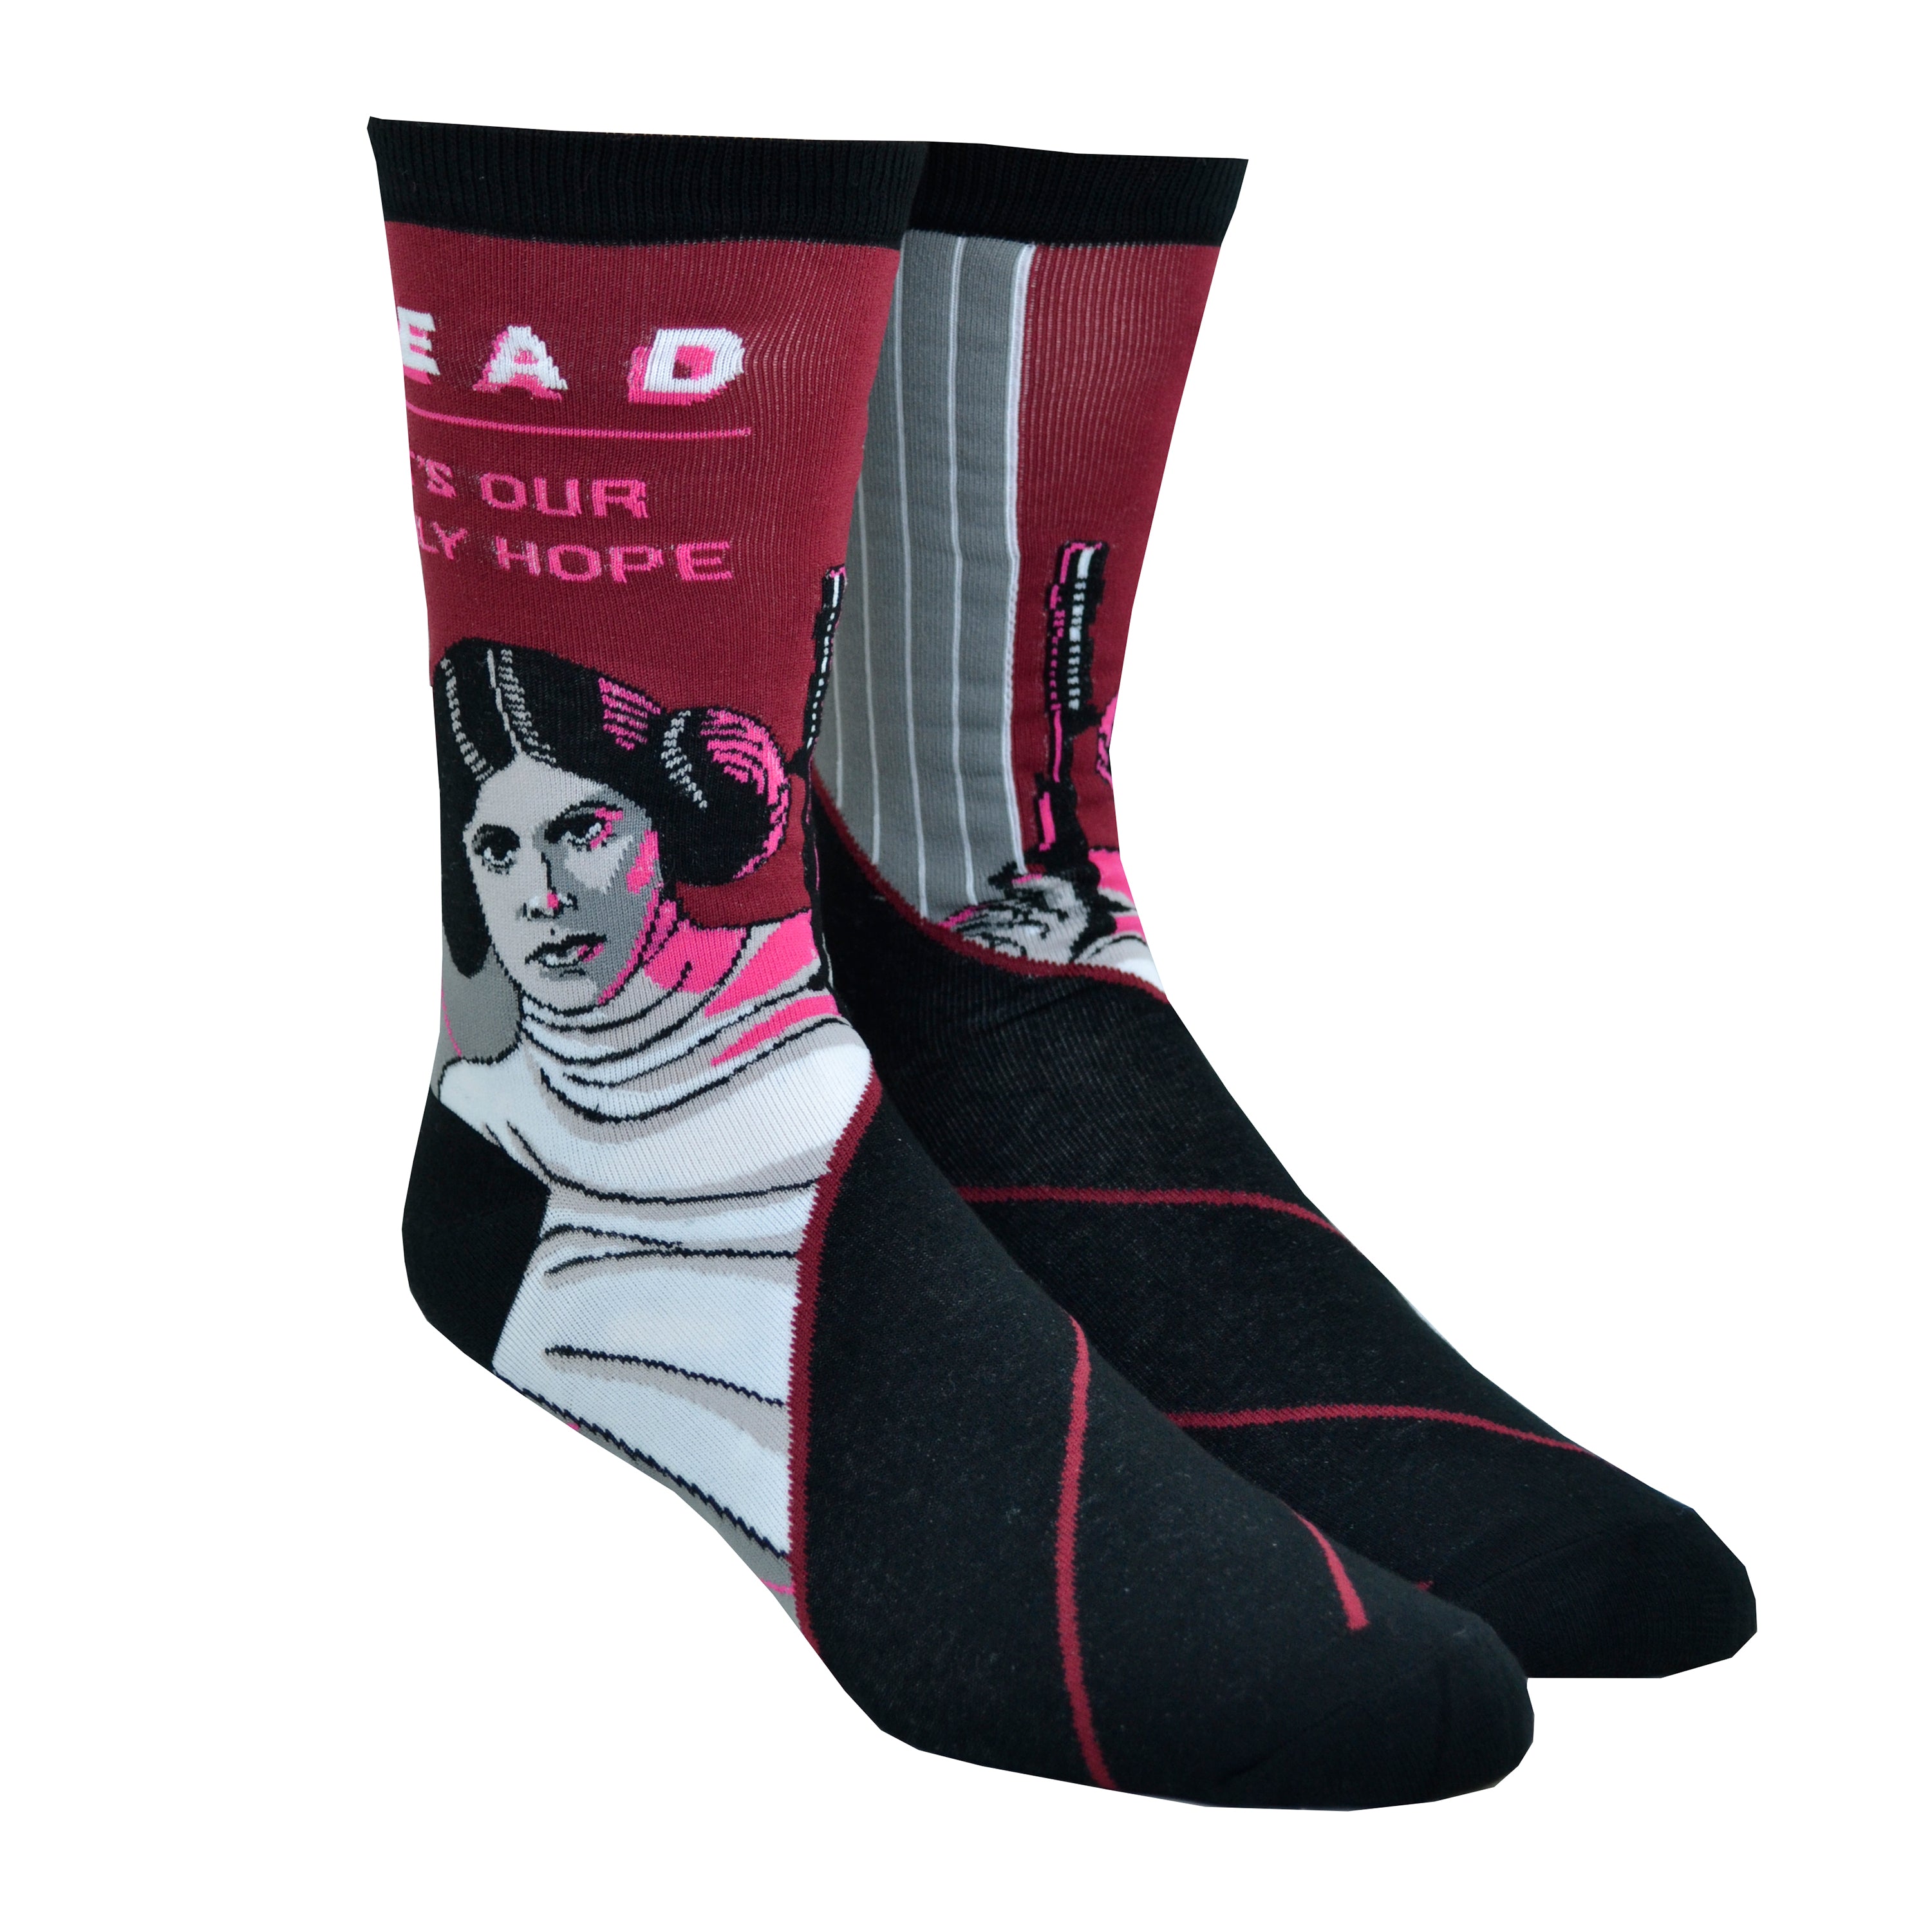 Shown on leg forms, a pair of Out of Print brand unisex cotton crew socks. The heel, cuff, and toe are all black with the leg of the sock featuring Princess Leia from Star Wars and the text, 